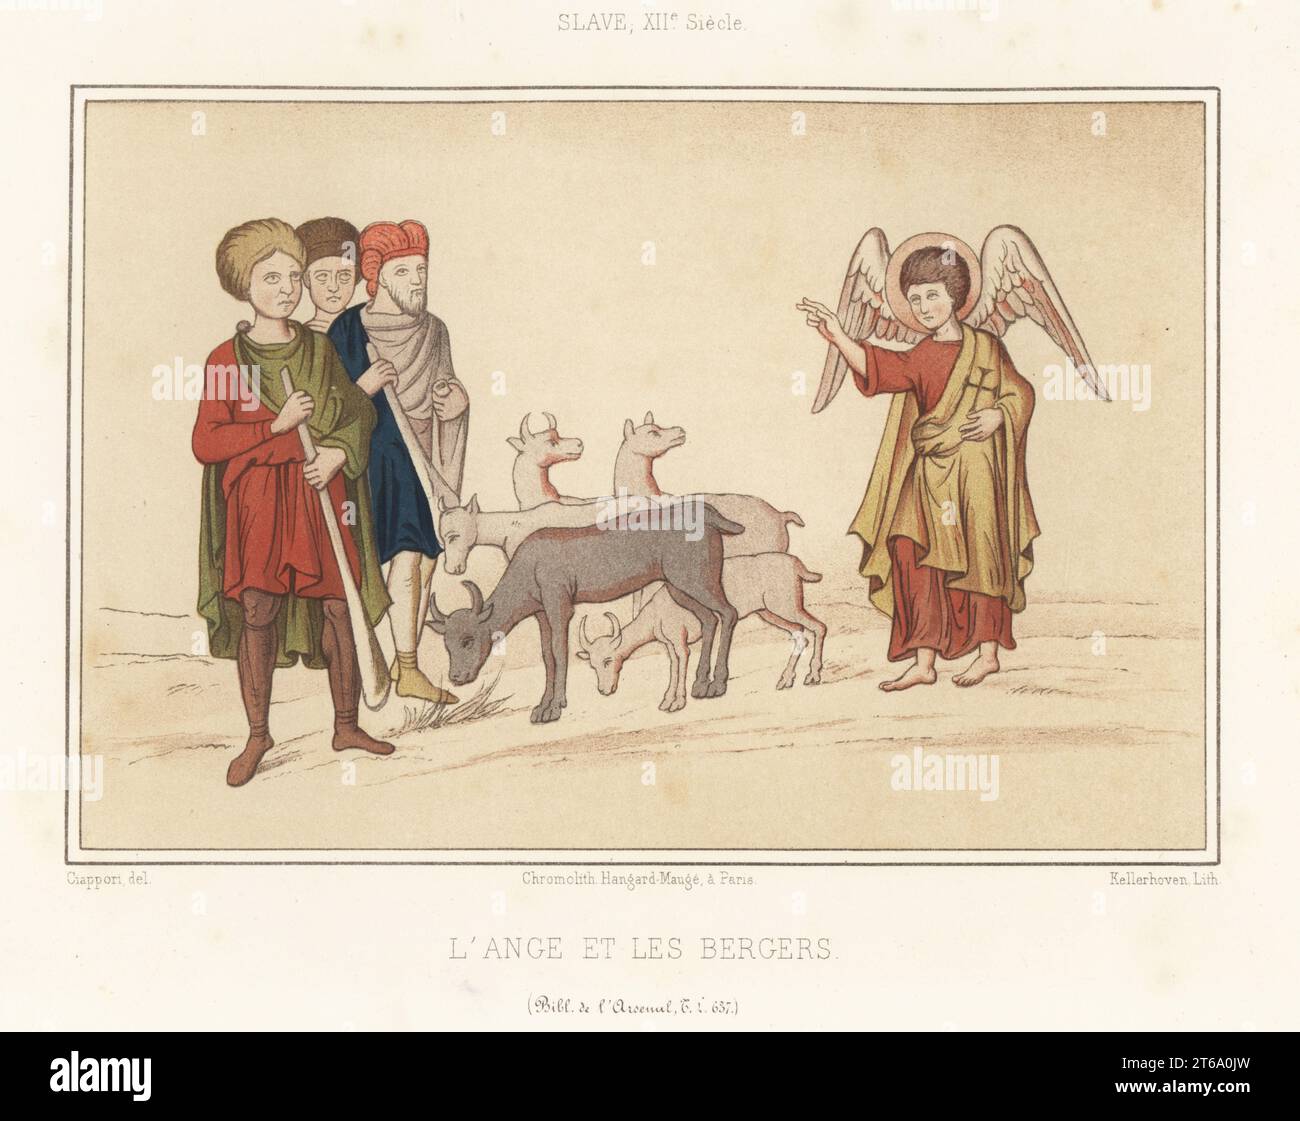 Slav peasant costumes, 12th century. Shepherds in cloaks, tunics and trousers. The angel appearing to the shepherds. L'ange et les bergers, Slave XIIe siecle. From MS T.L. 637, Bibliotheque de l'Arsenal. Chromolithograph by Franz Kellerhoven after Claudius Joseph Ciappori from Charles Louandres Les Arts Somptuaires, The Sumptuary Arts, Hangard-Mauge, Paris, 1858. Stock Photo